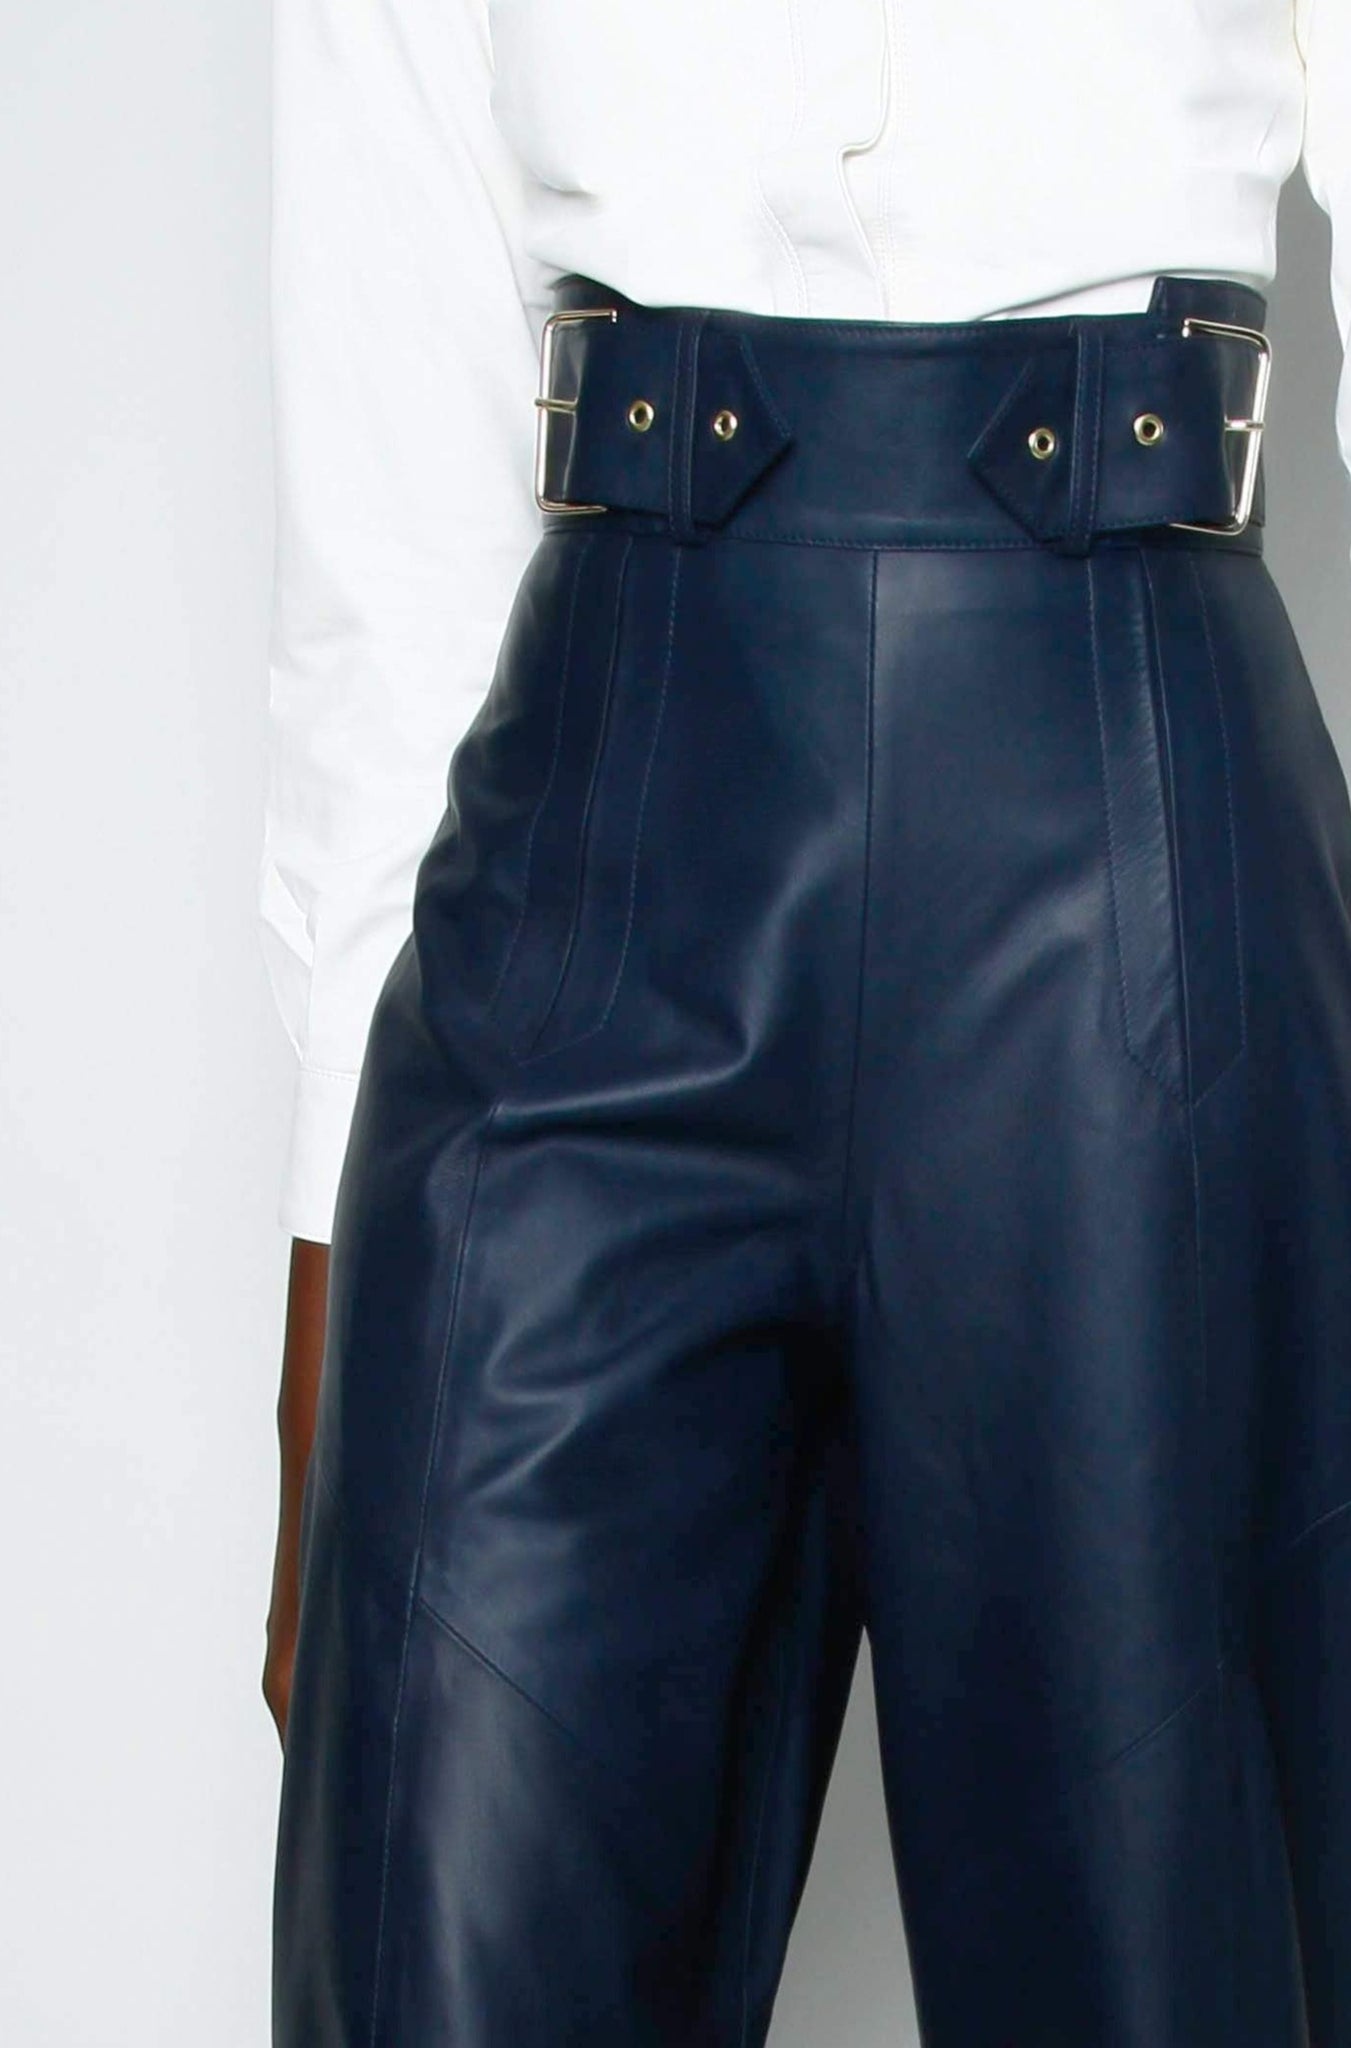 Johnny WIDE LEG LEATHER TROUSER - NAVY